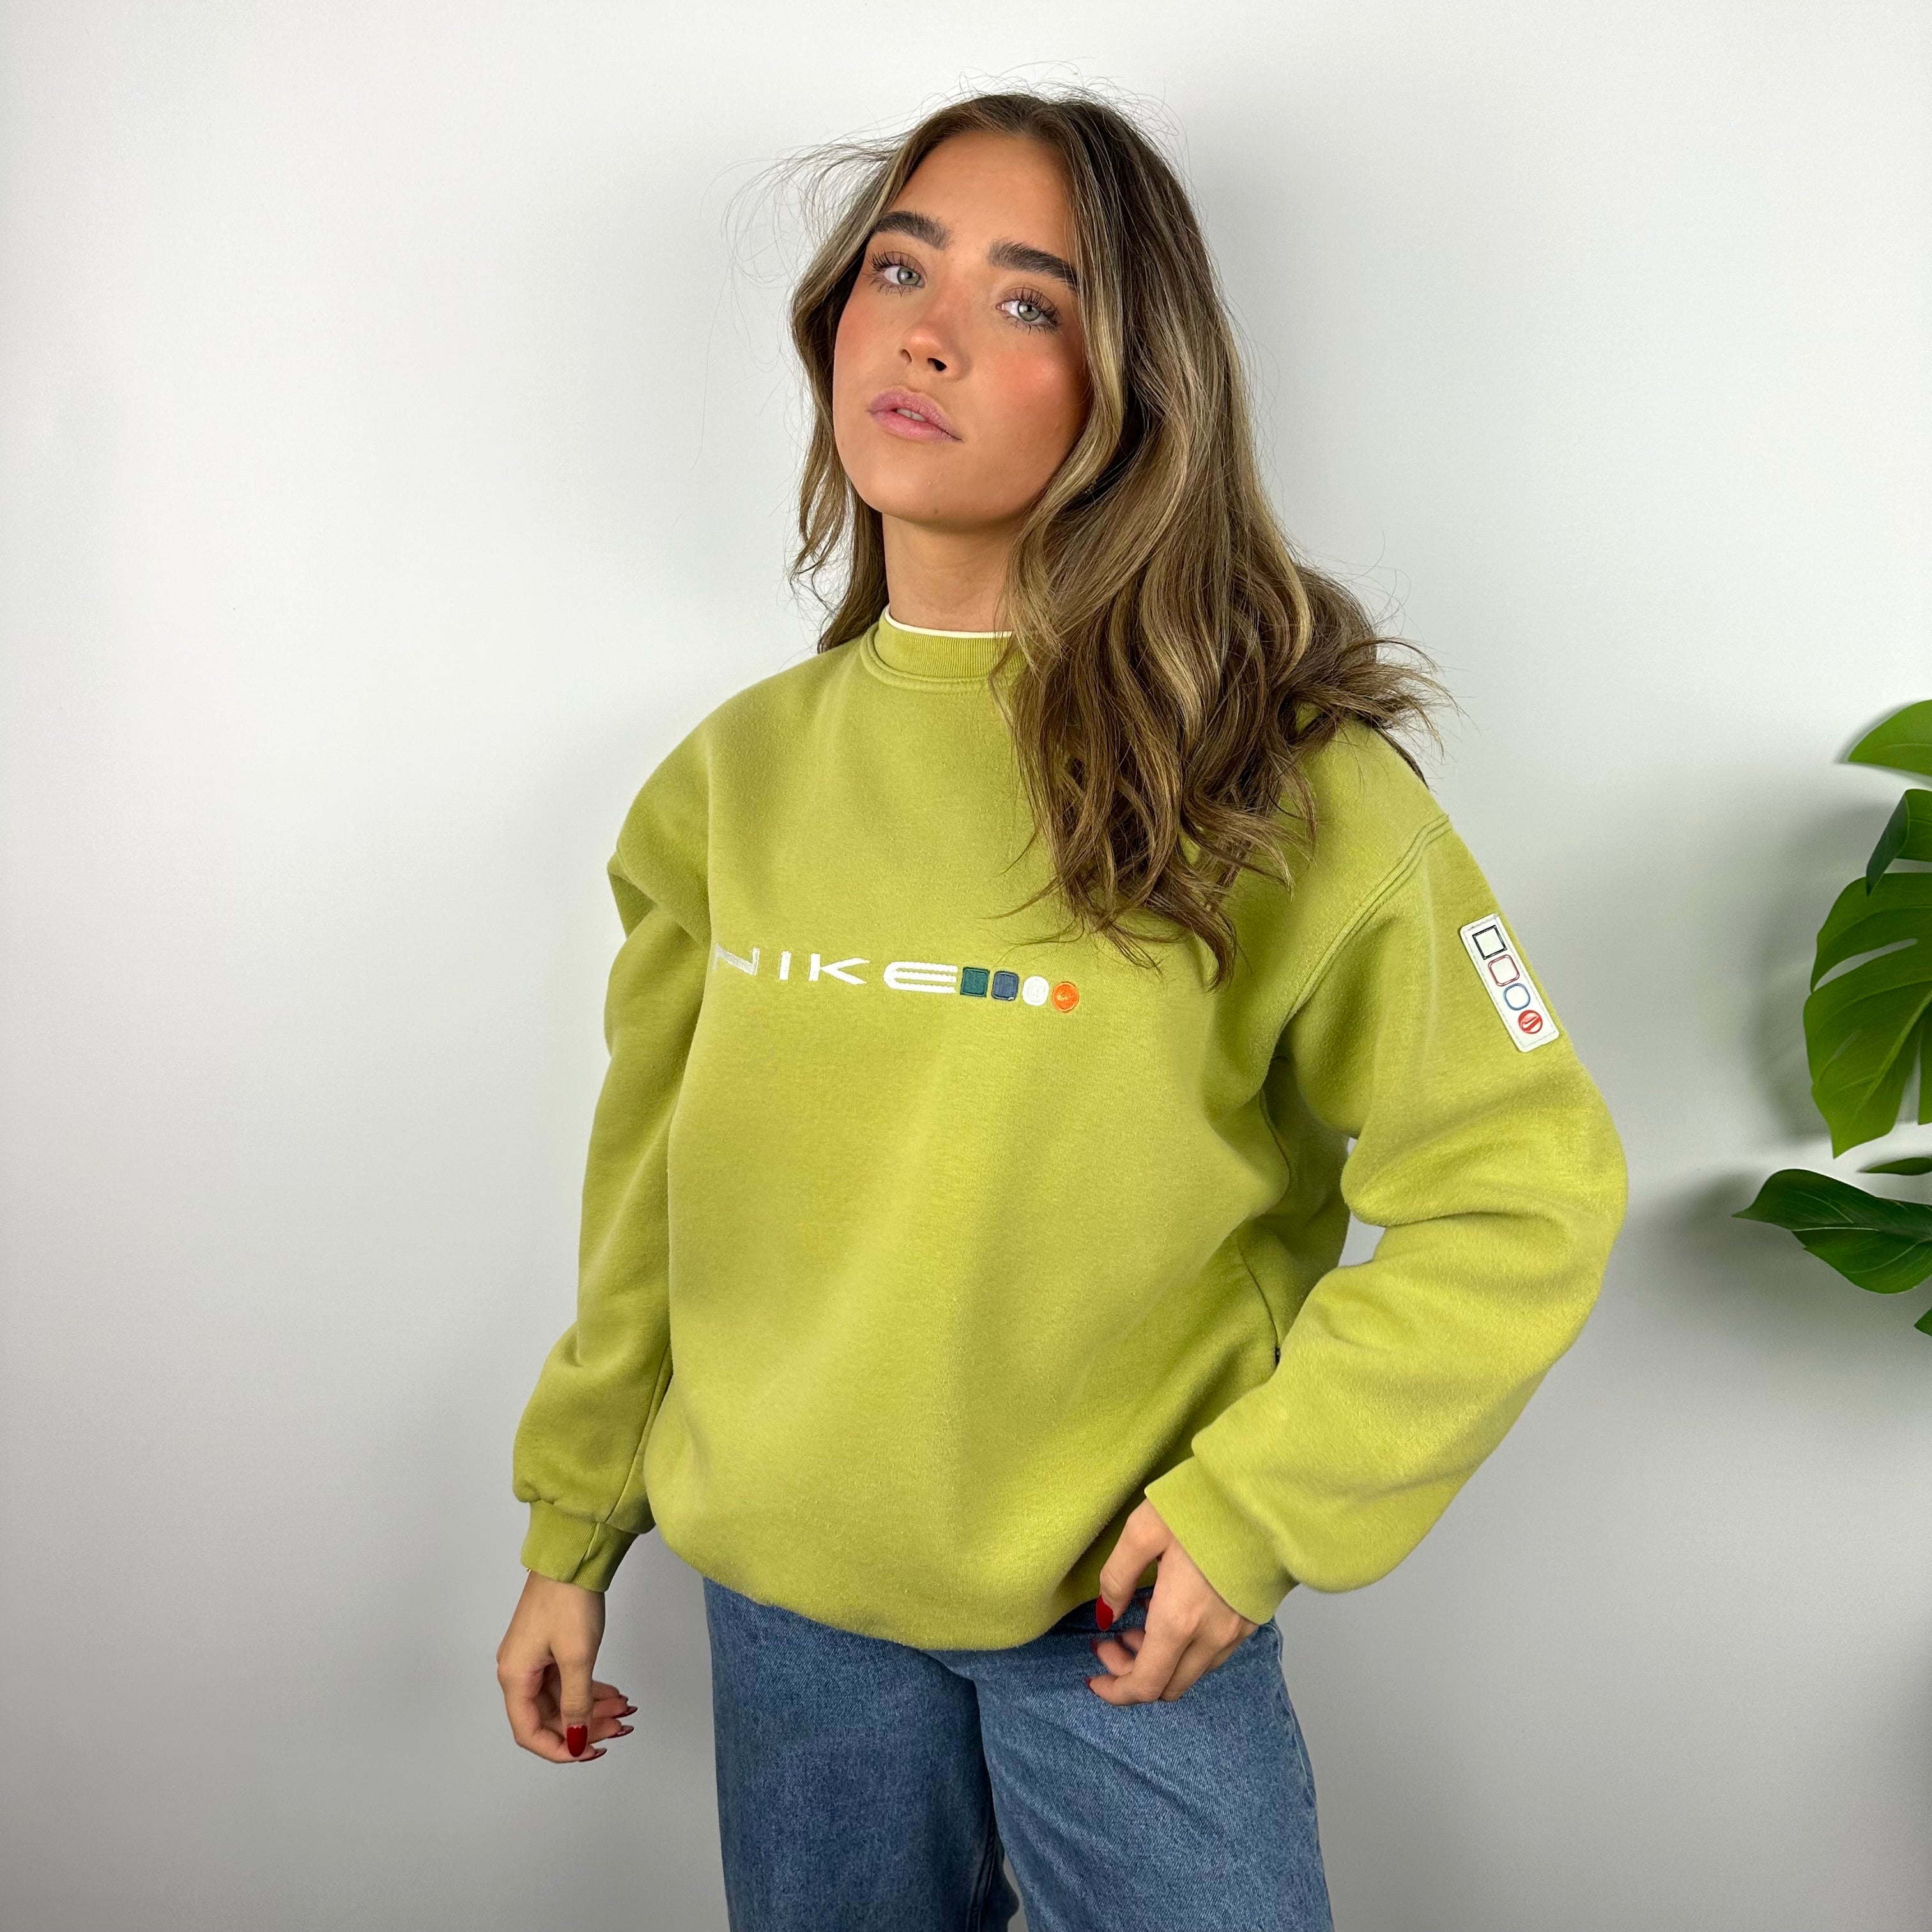 Nike Lime Green Embroidered Spell Out Sweatshirt (S)